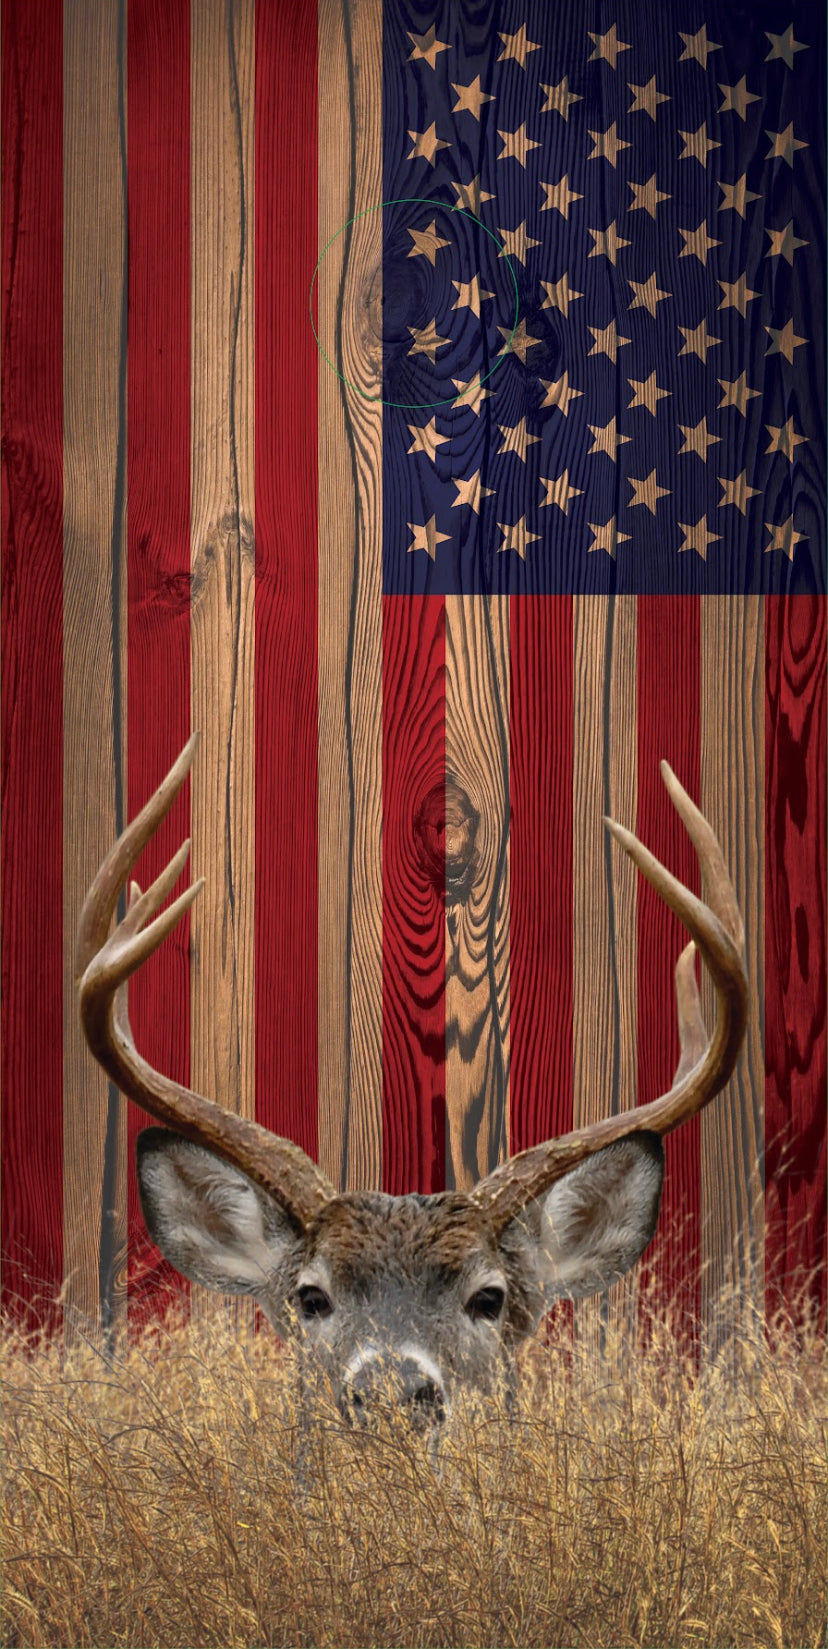 Wood Grain Deer&Flag/ Union Right (includes 8 all-weather resin bags)